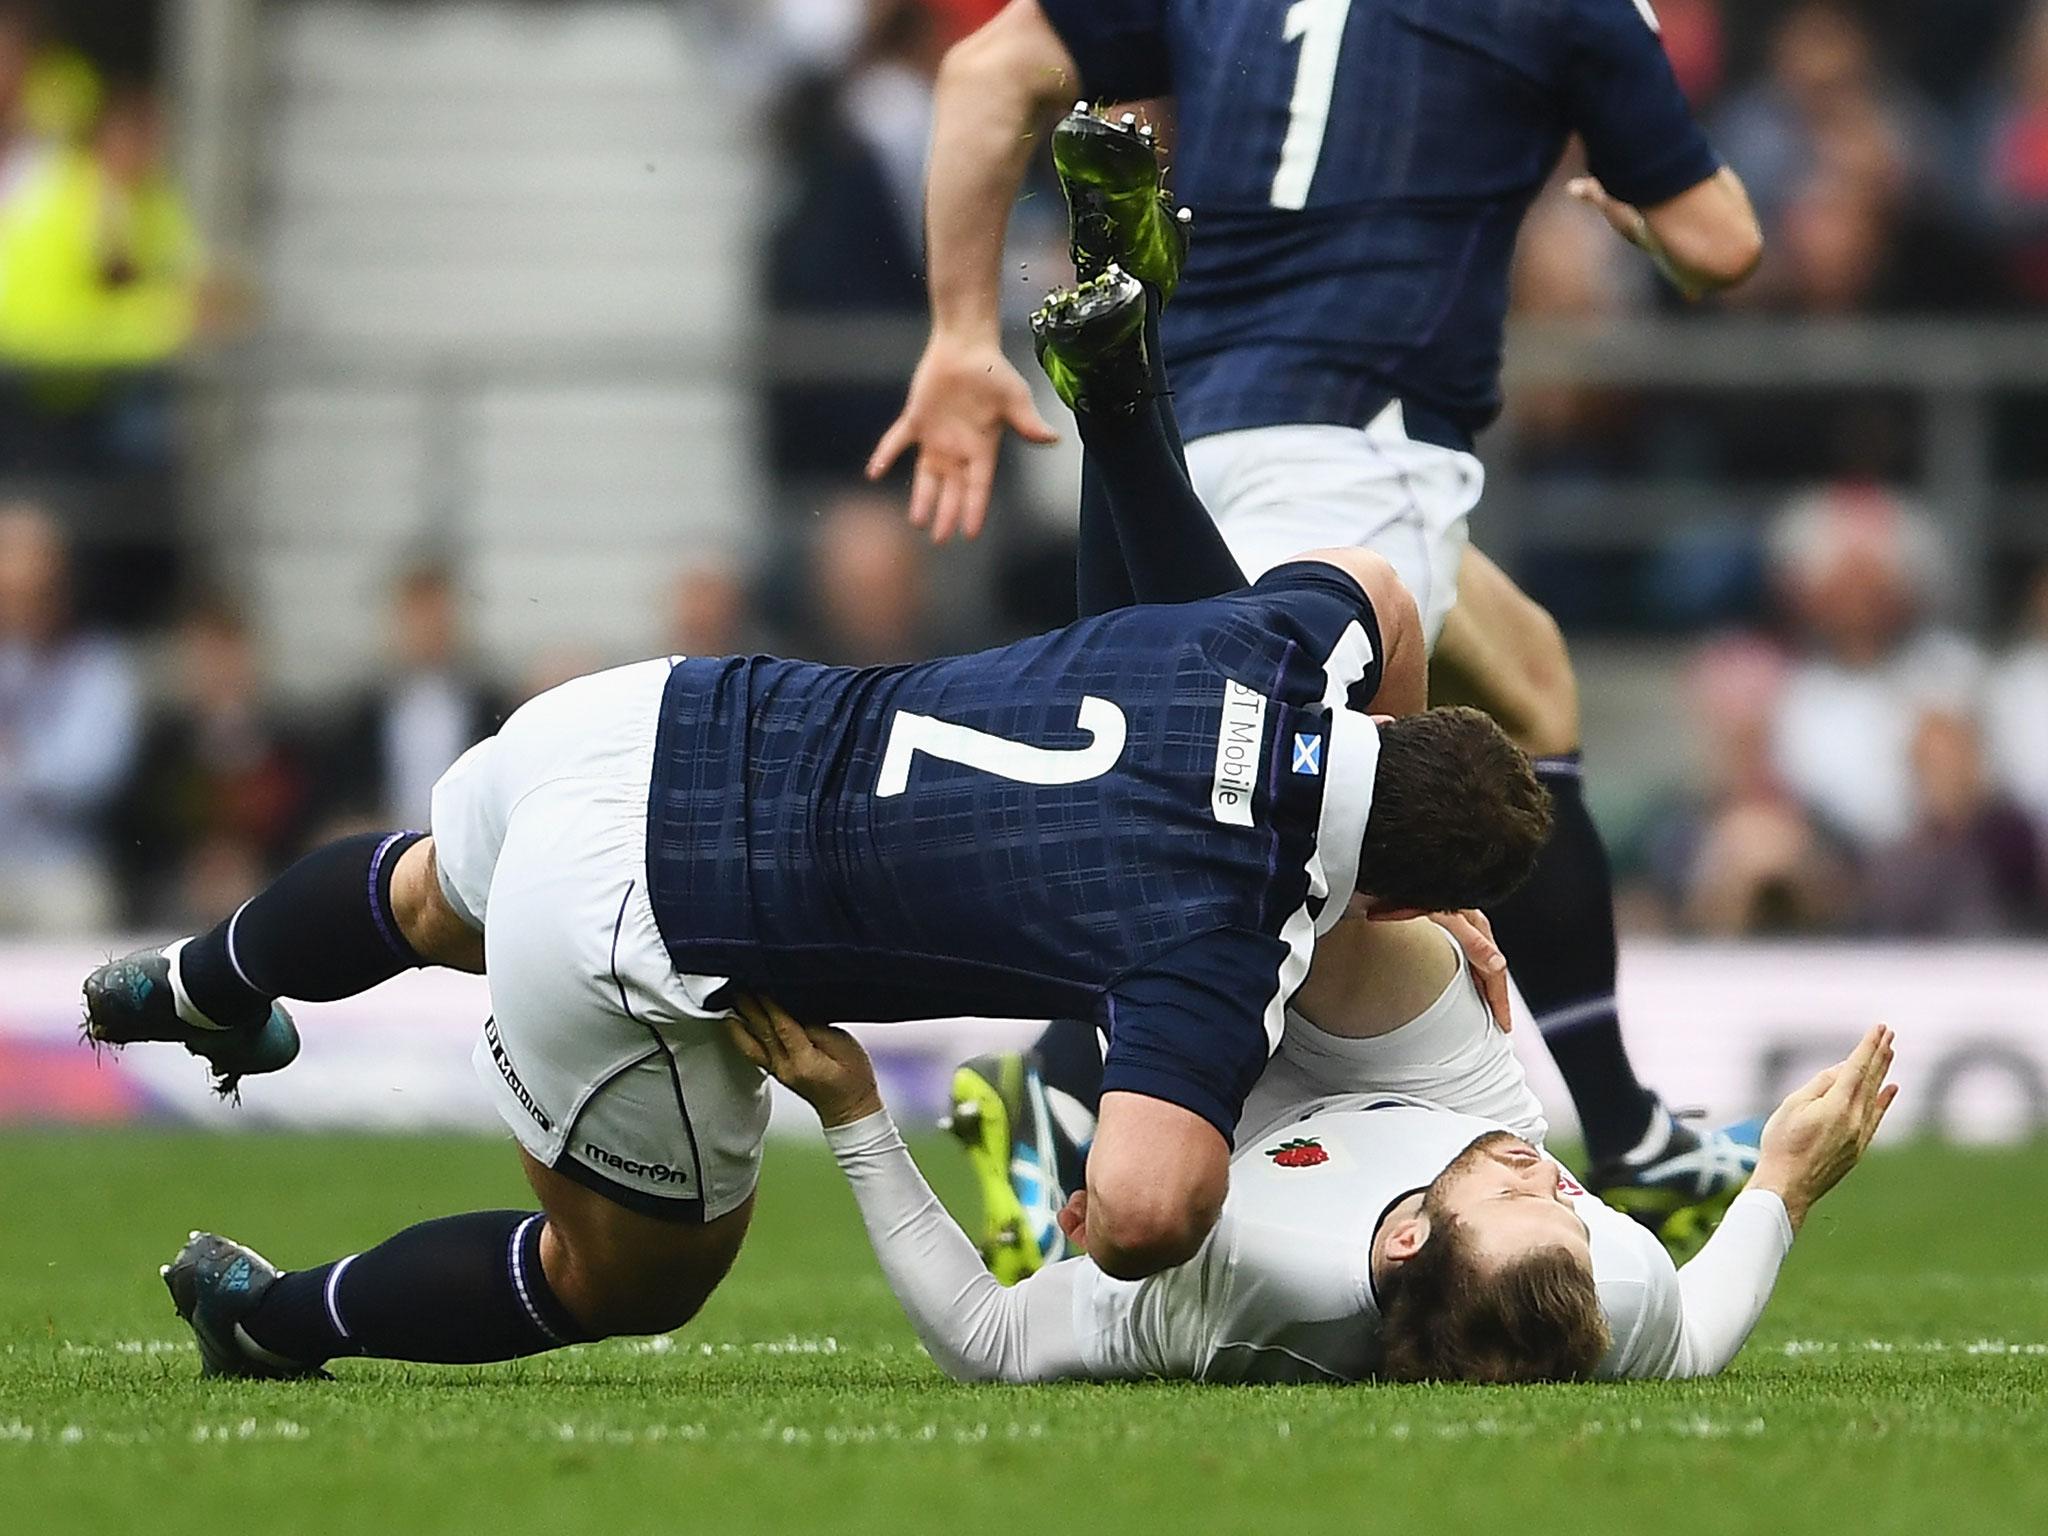 Fraser Brown has been cited for a dangerous tackle on Elliot Daly in the second minute of England's win over Scotland